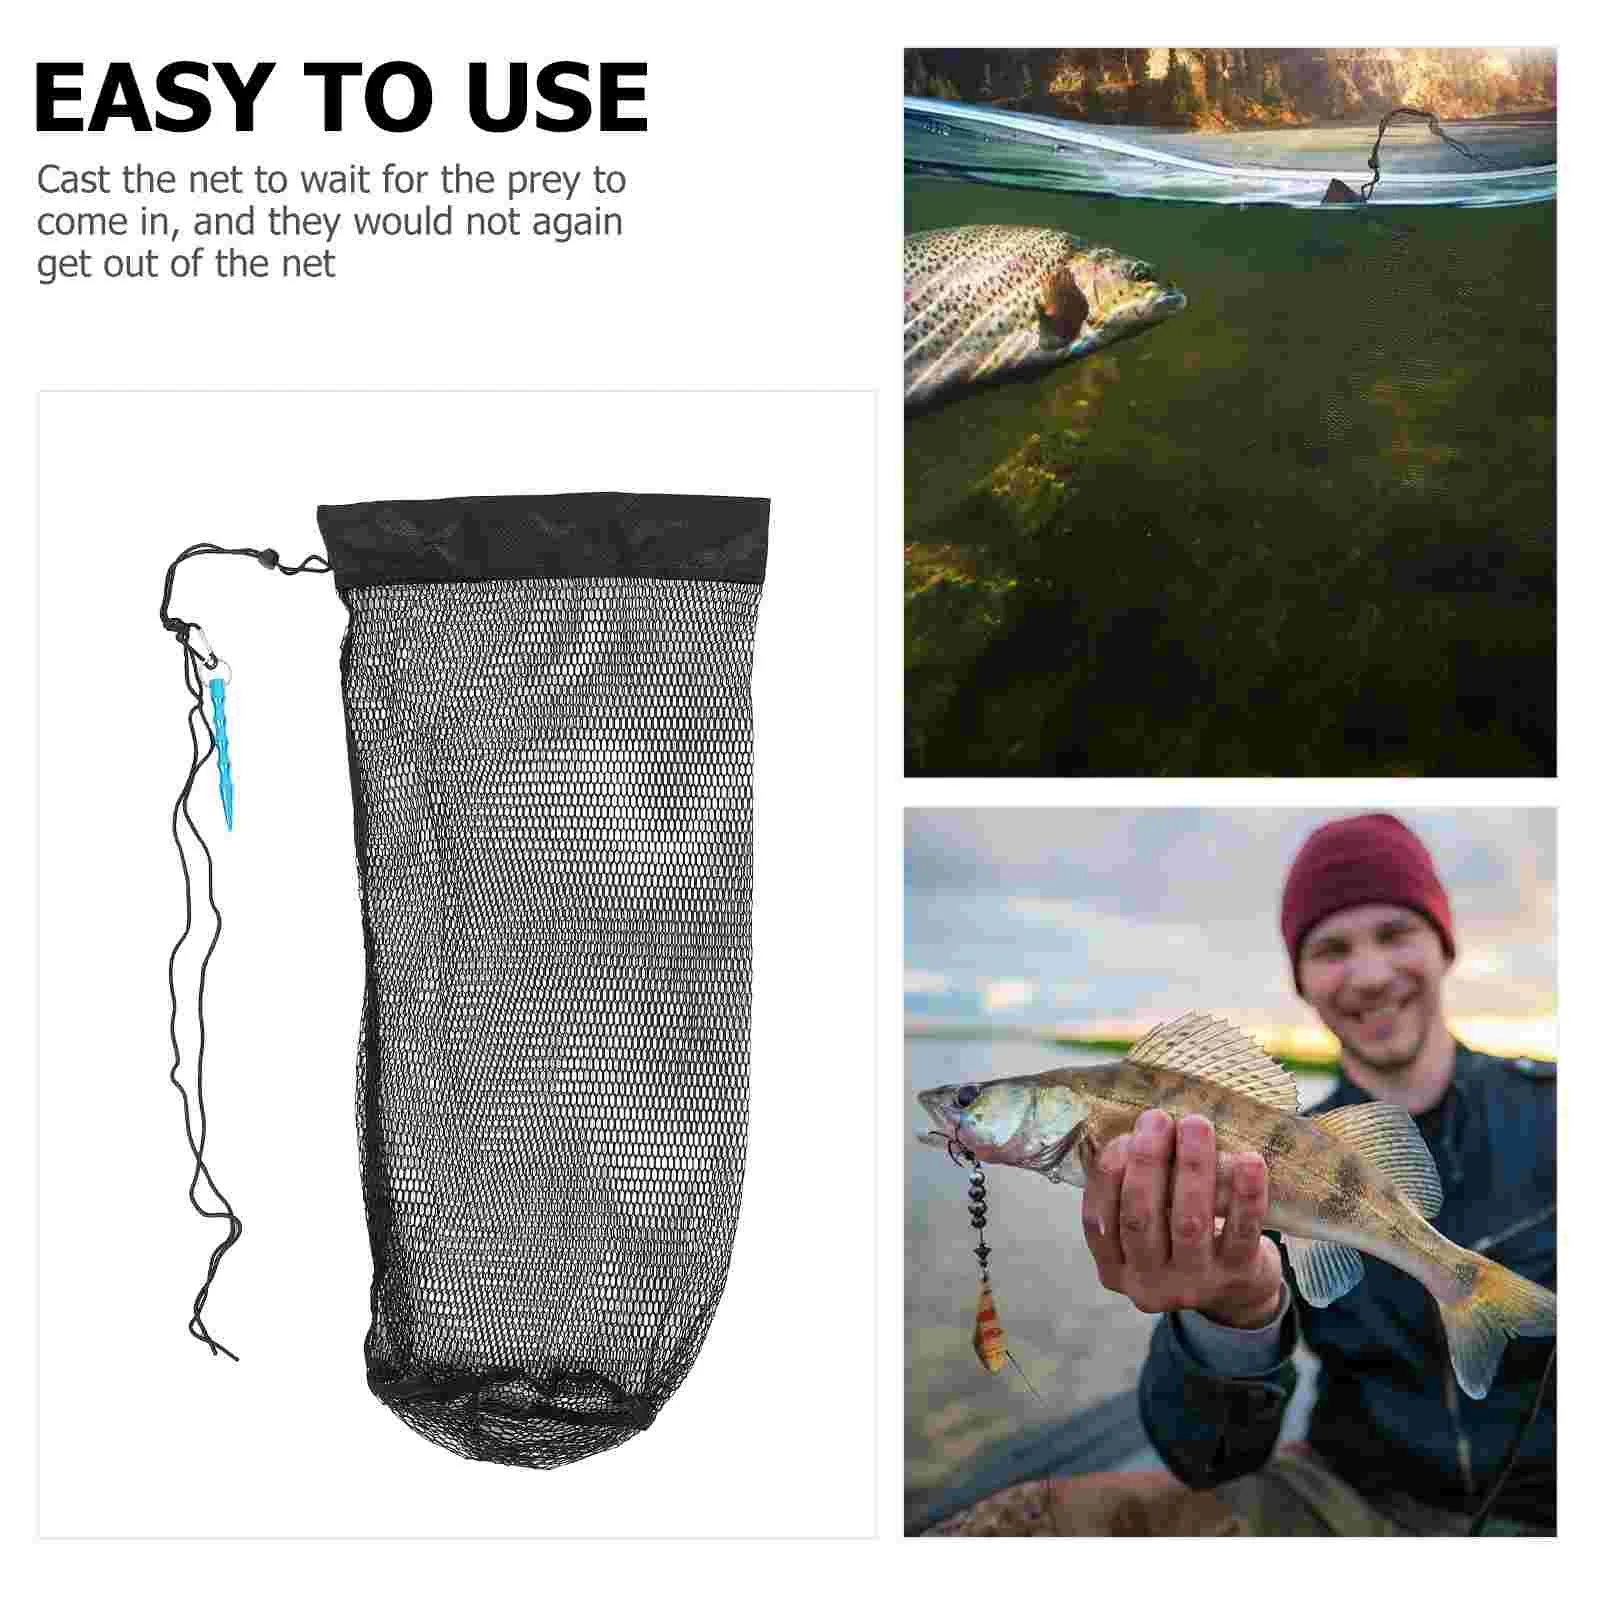 https://ae01.alicdn.com/kf/S779b2bdd60ed4b1383b4d3c38229704eo/Outdoor-Seafood-Collection-Tool-Fishing-Net-Tackle-Minnows-Shrimps-Lobsters-Catching-Basket-Bag-Crab-Mesh-Cage.jpg